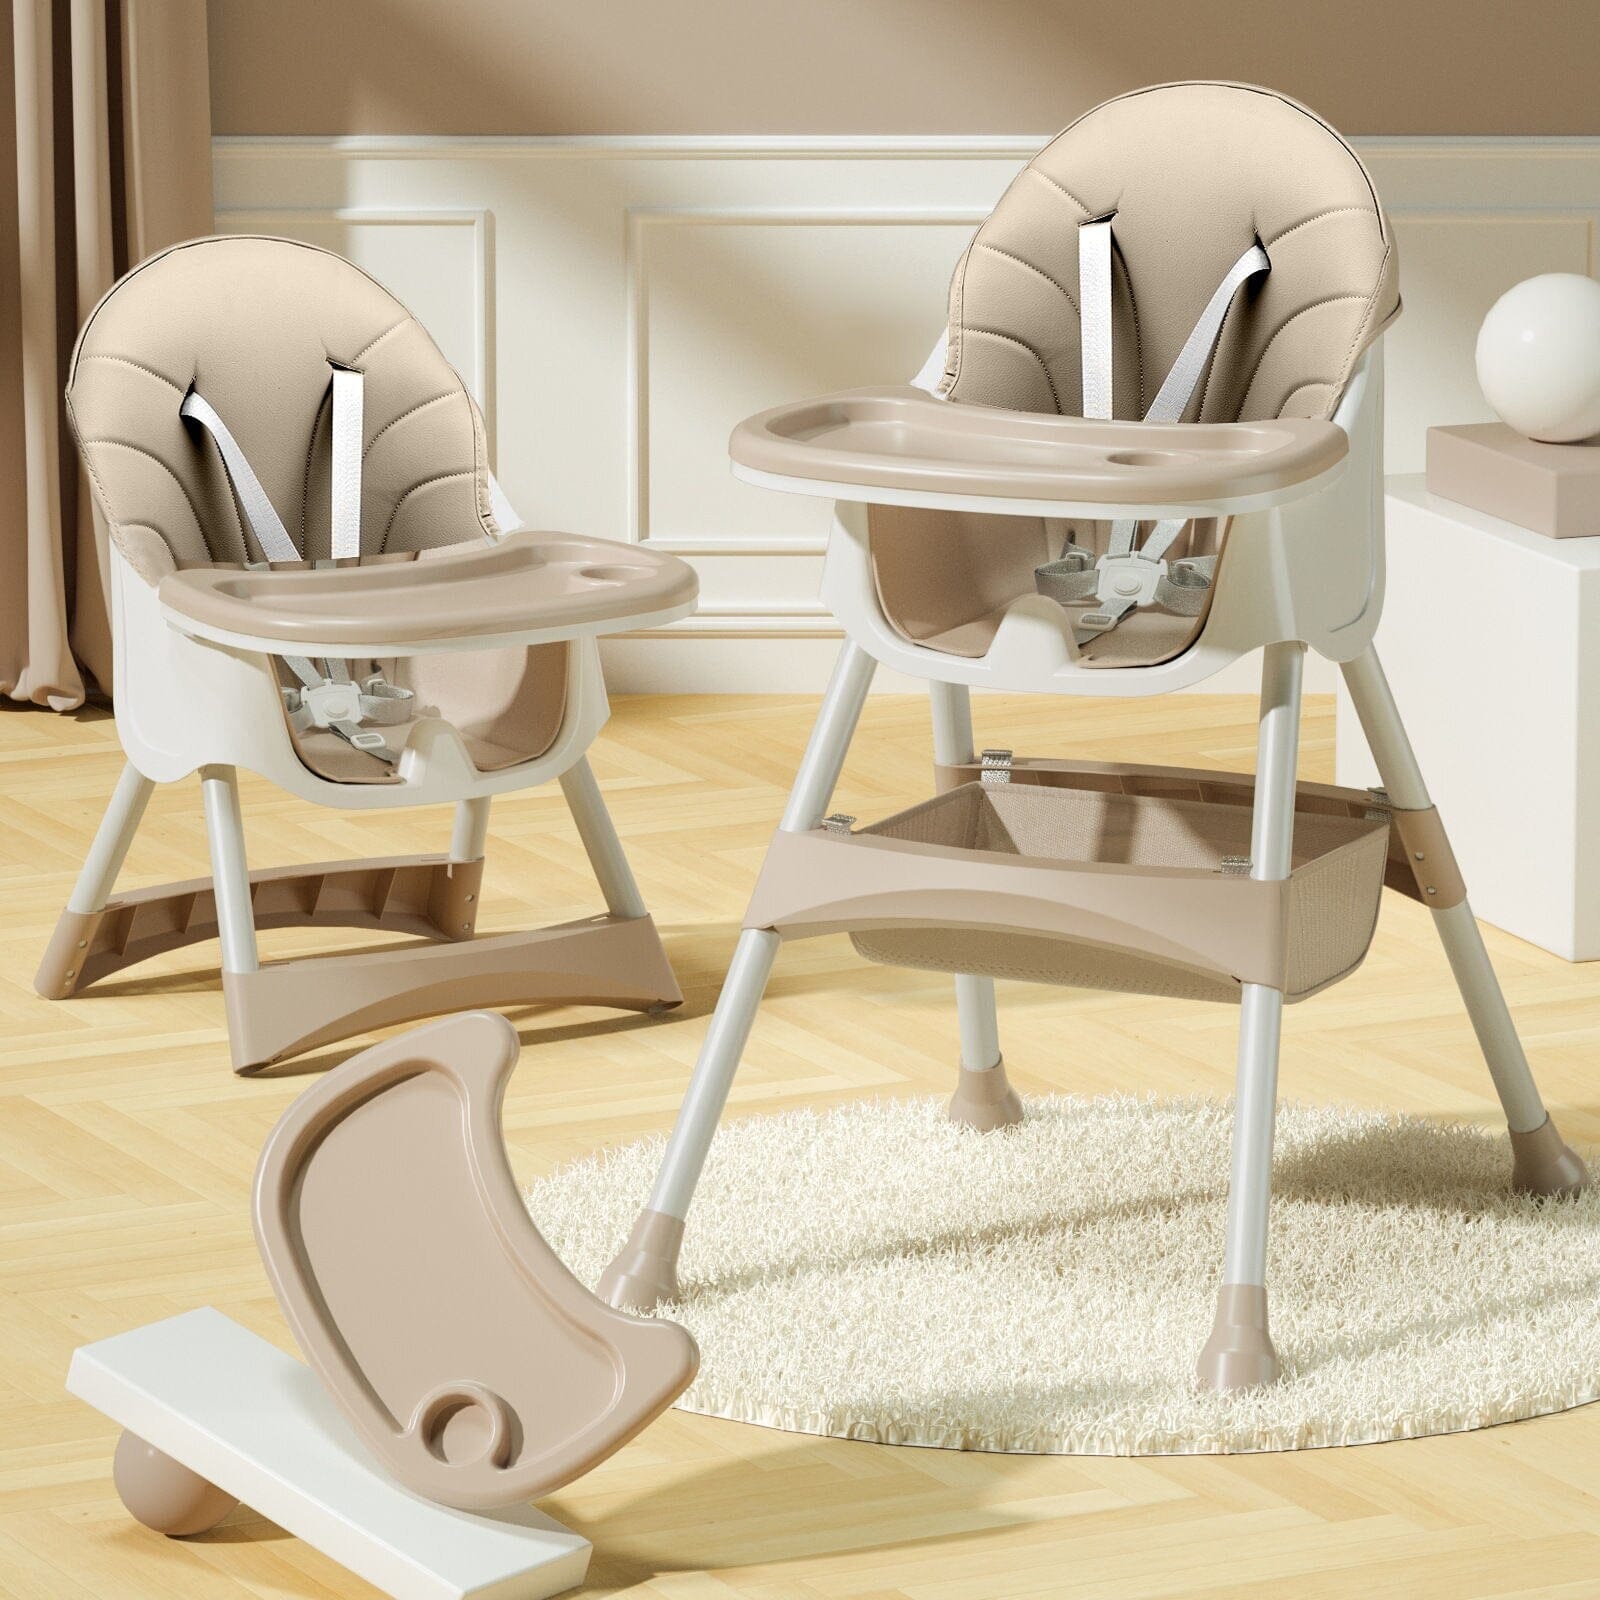 0-6Years Child Folding Dinner Chair for Baby Portable Baby Seat Baby Dinner Table Multifunction Adjustable Chairs for Children 0 Baby Bubble Store beige 